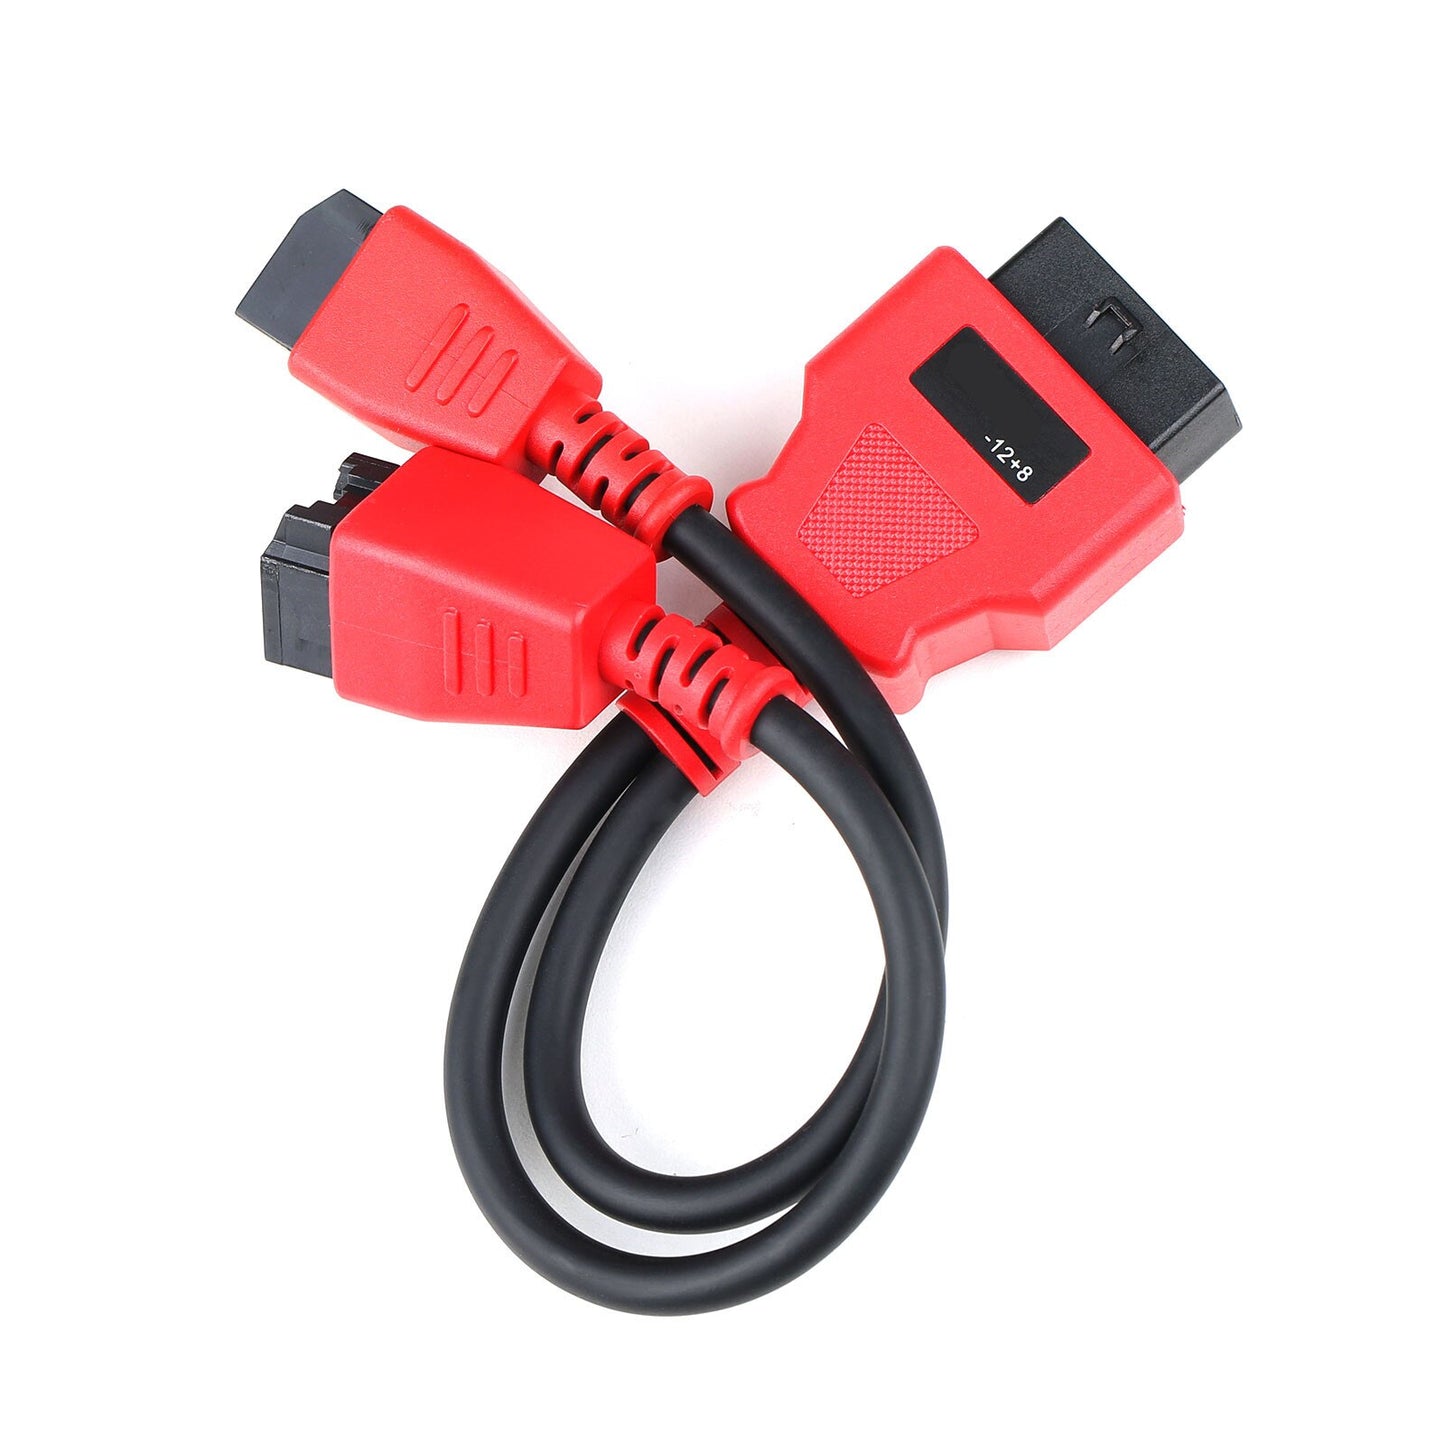 FCA 12+8 Pin OBD Cable For Chrysler Programming Supports MaxiSys/IM608 /Launch X431 V/ OBDSTAR